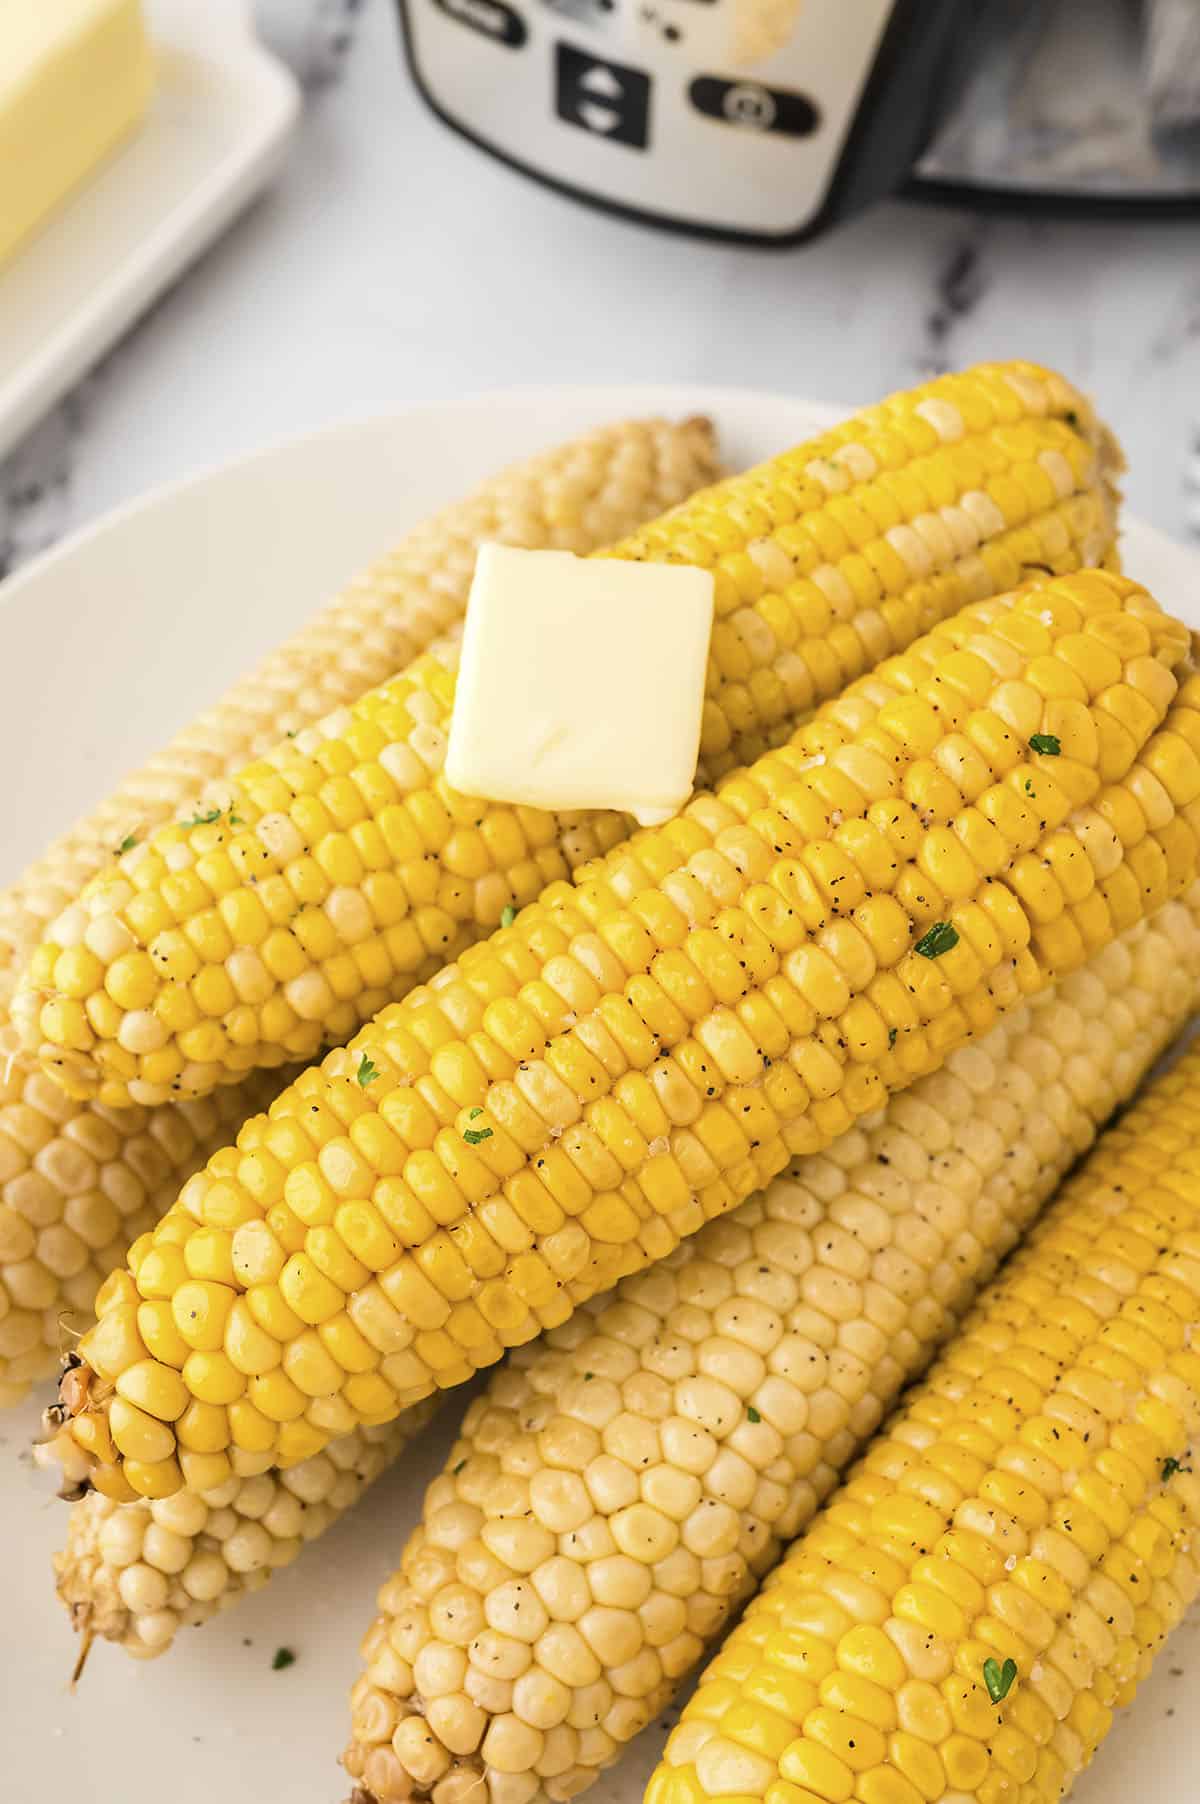 Slow cooker corn on the cob piled on platter with pat of butter.